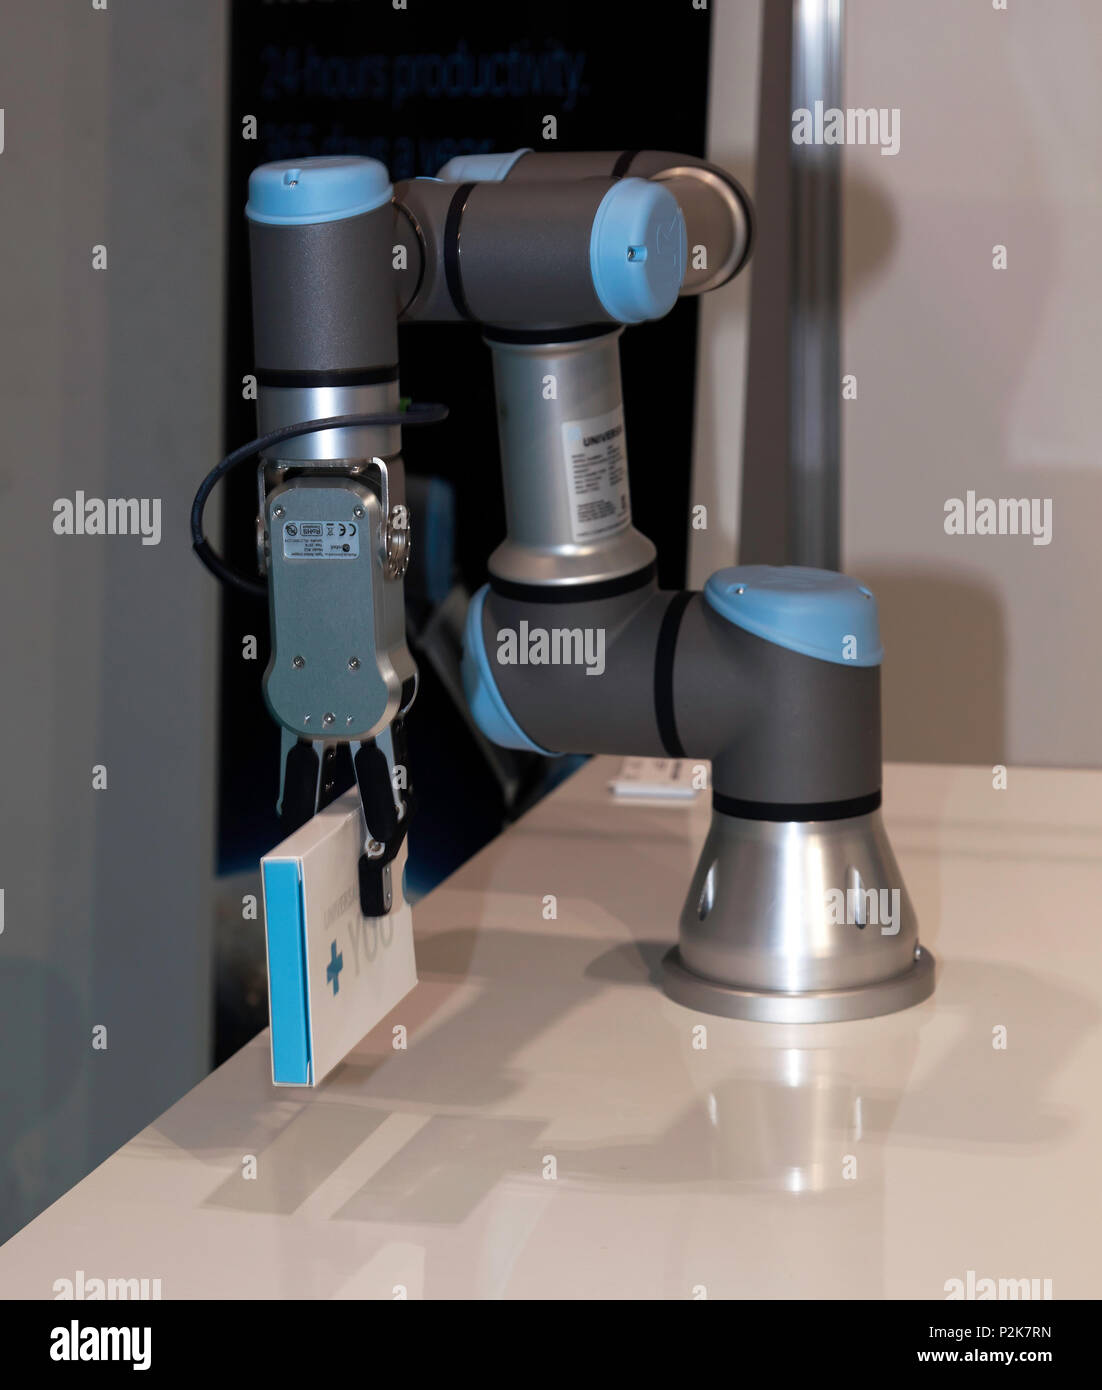 Universal Robots small, UR3, flexible industrial collaborative robot arm,  being demonstrated at the AI Summit, ExCel London Stock Photo - Alamy